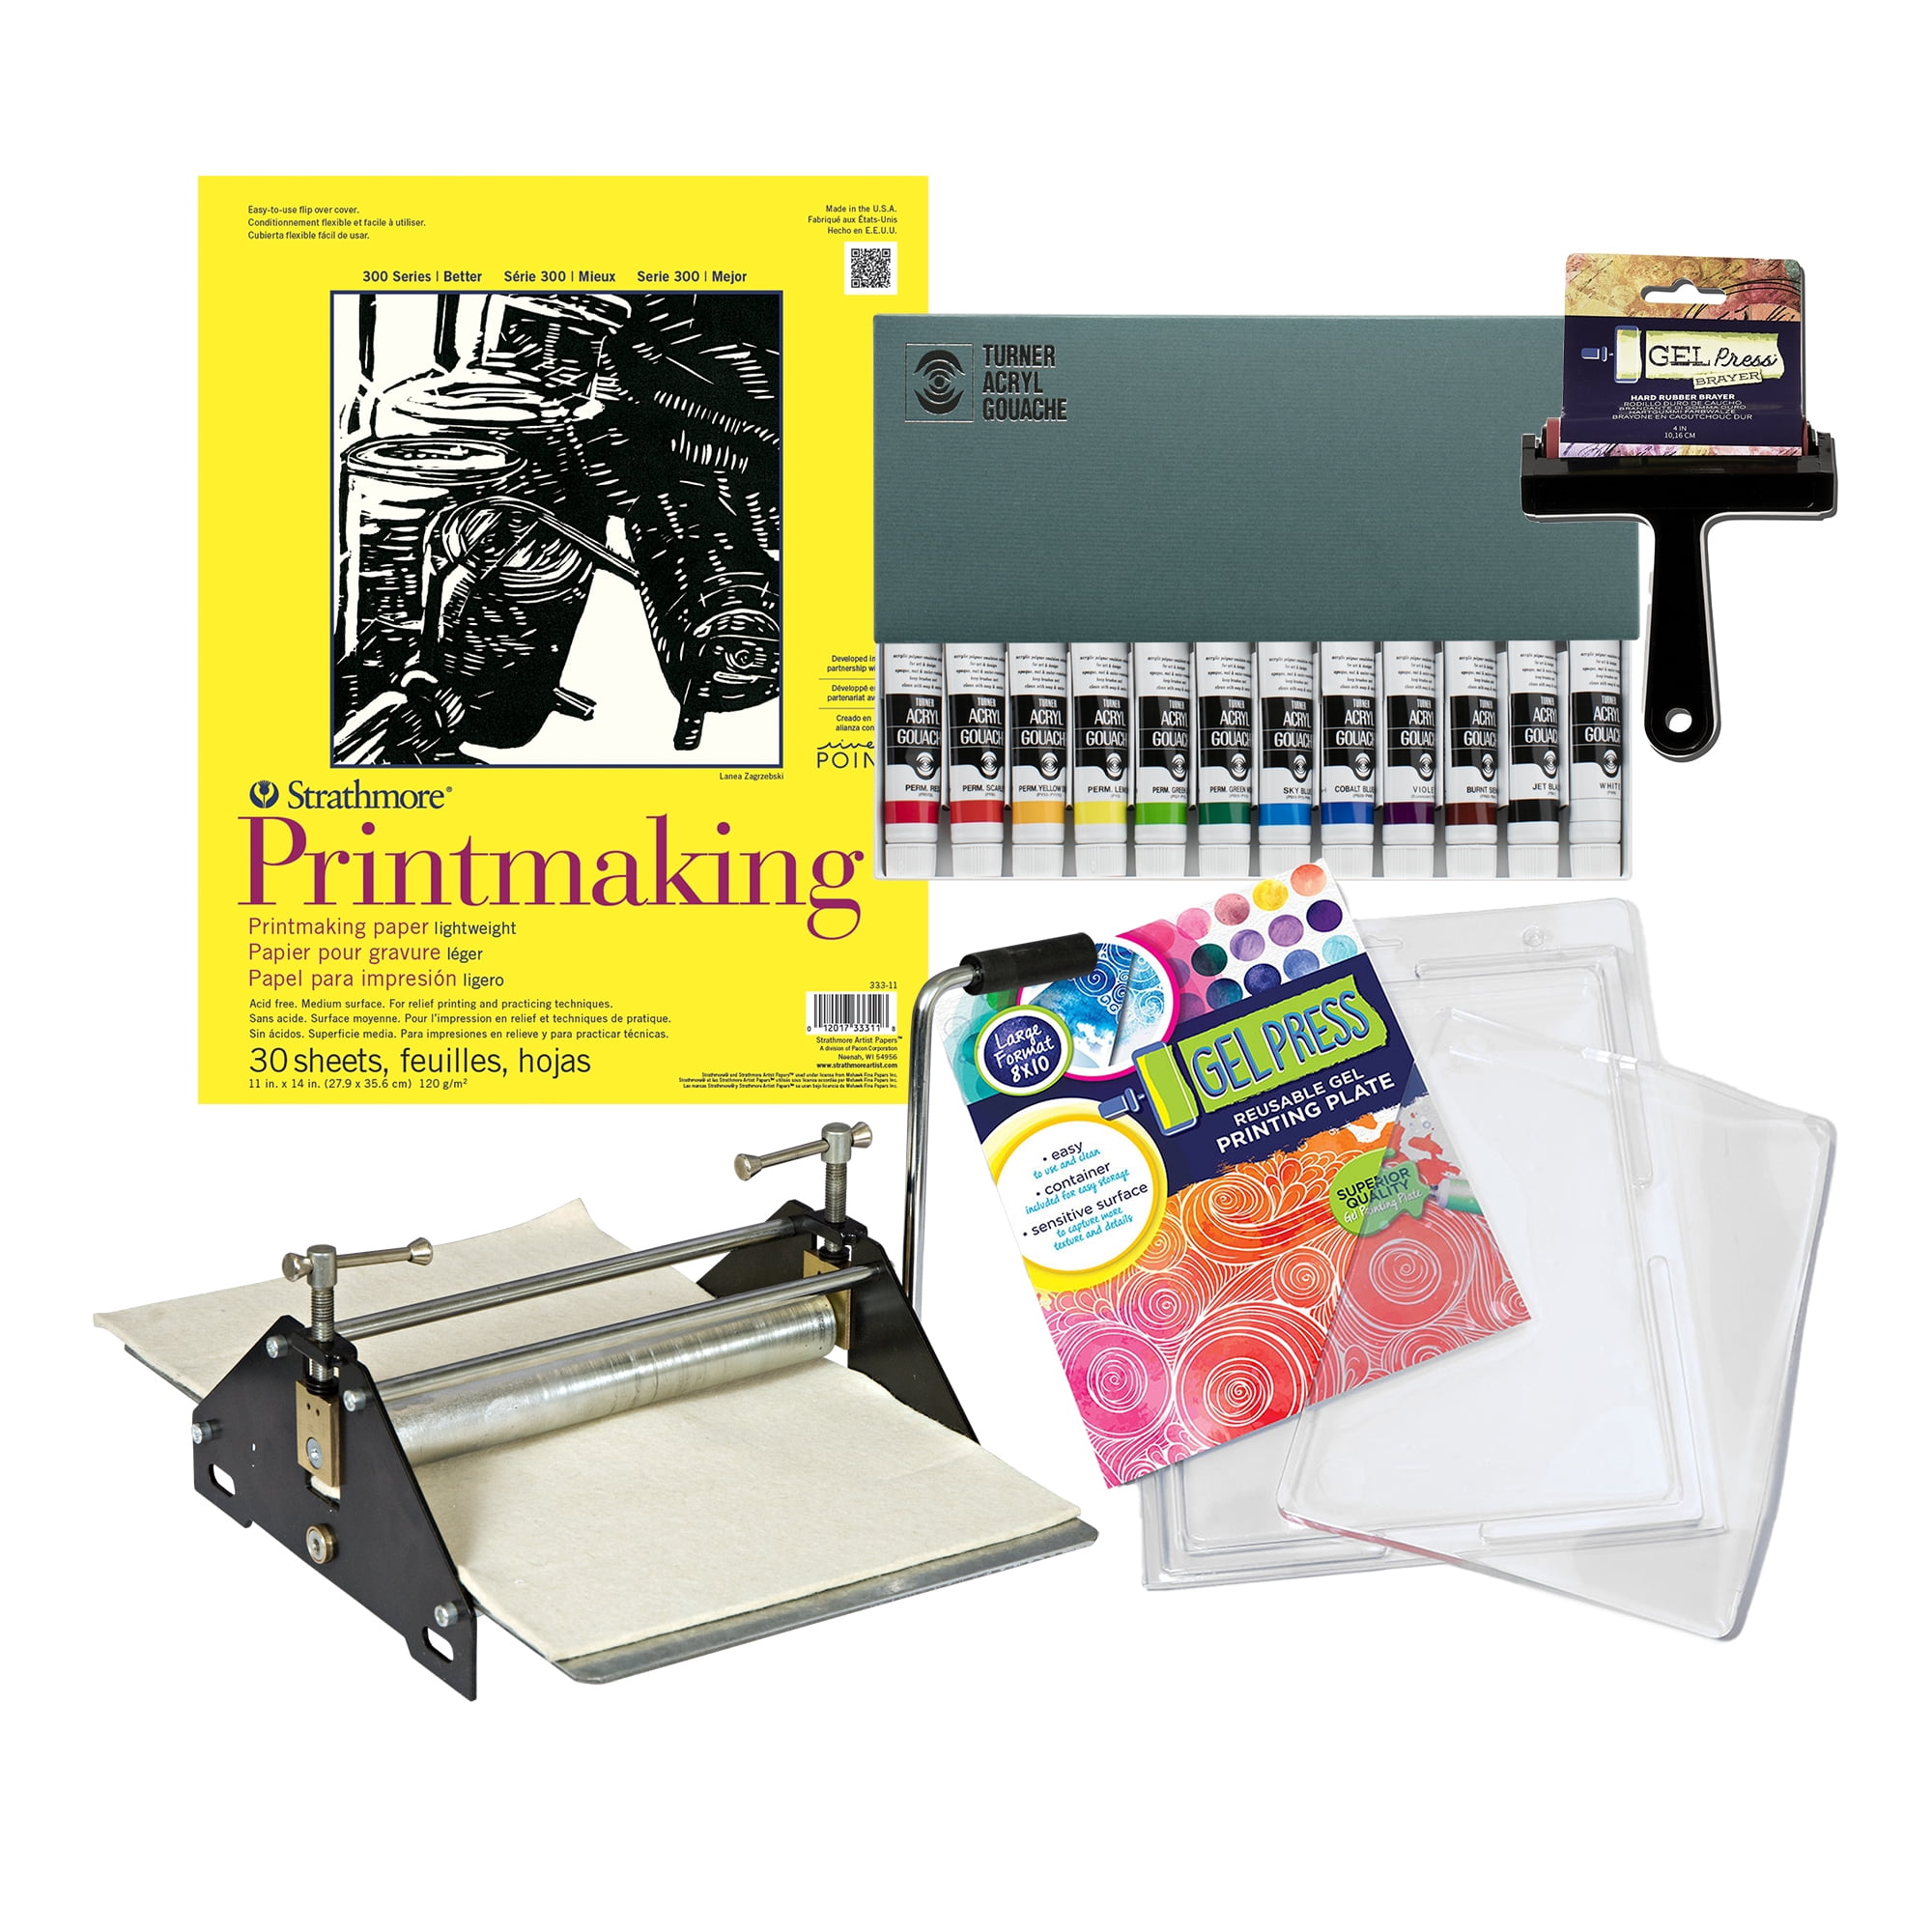 Creative Mark Artist Kit - Gel Printing Plate, Strathmore Printmaking  Journal, Acrylic Paint Set With Brayer Includes Paint Roller - Perfect for  Acrylic and Oil Paint, Craft Projects 